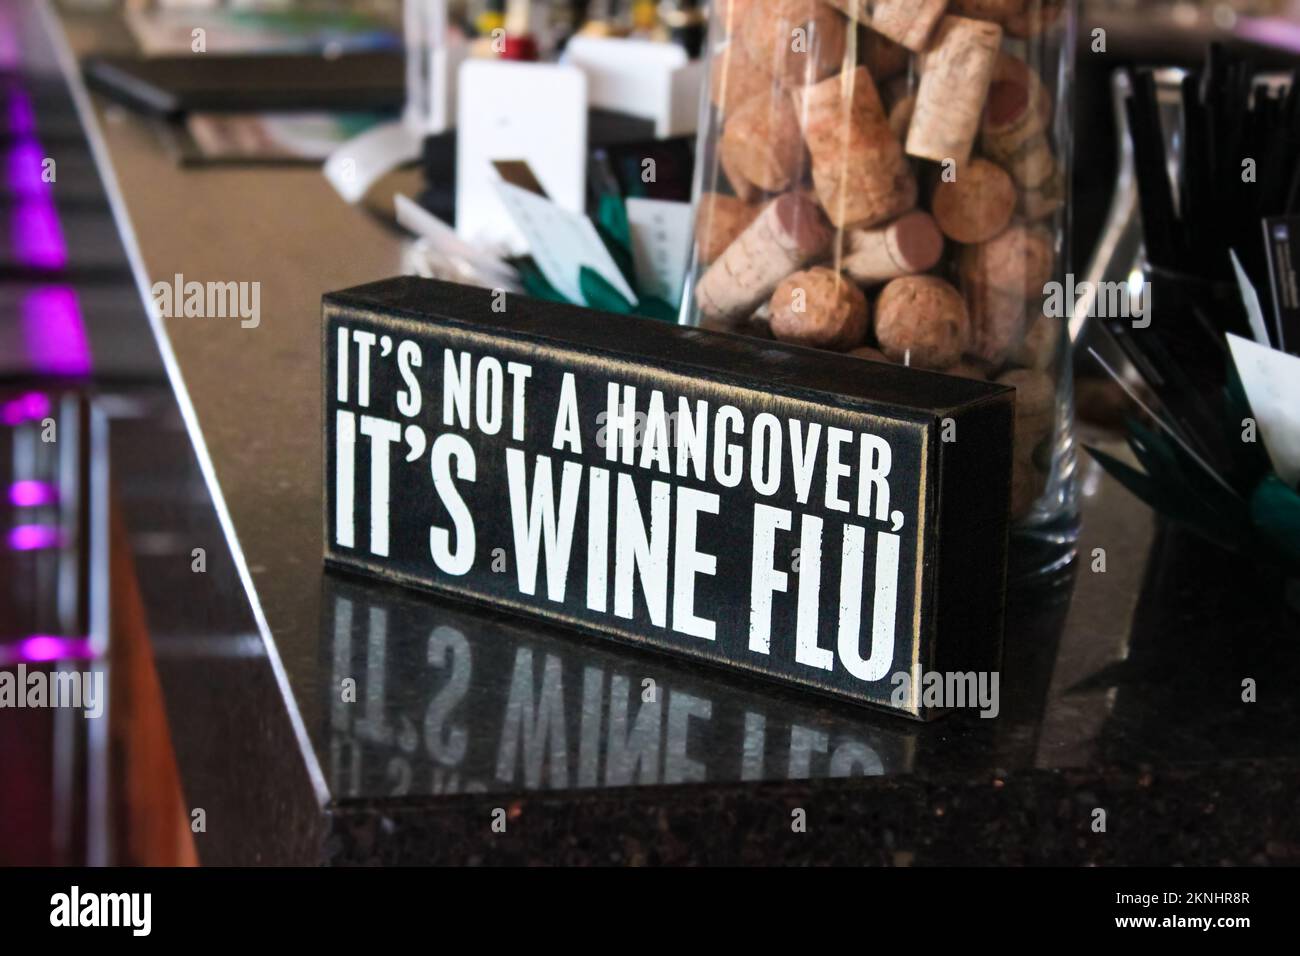 Sign saying Its not a hangover its wine flue sitting on marble countertop of bar with jar a corks behind Stock Photo